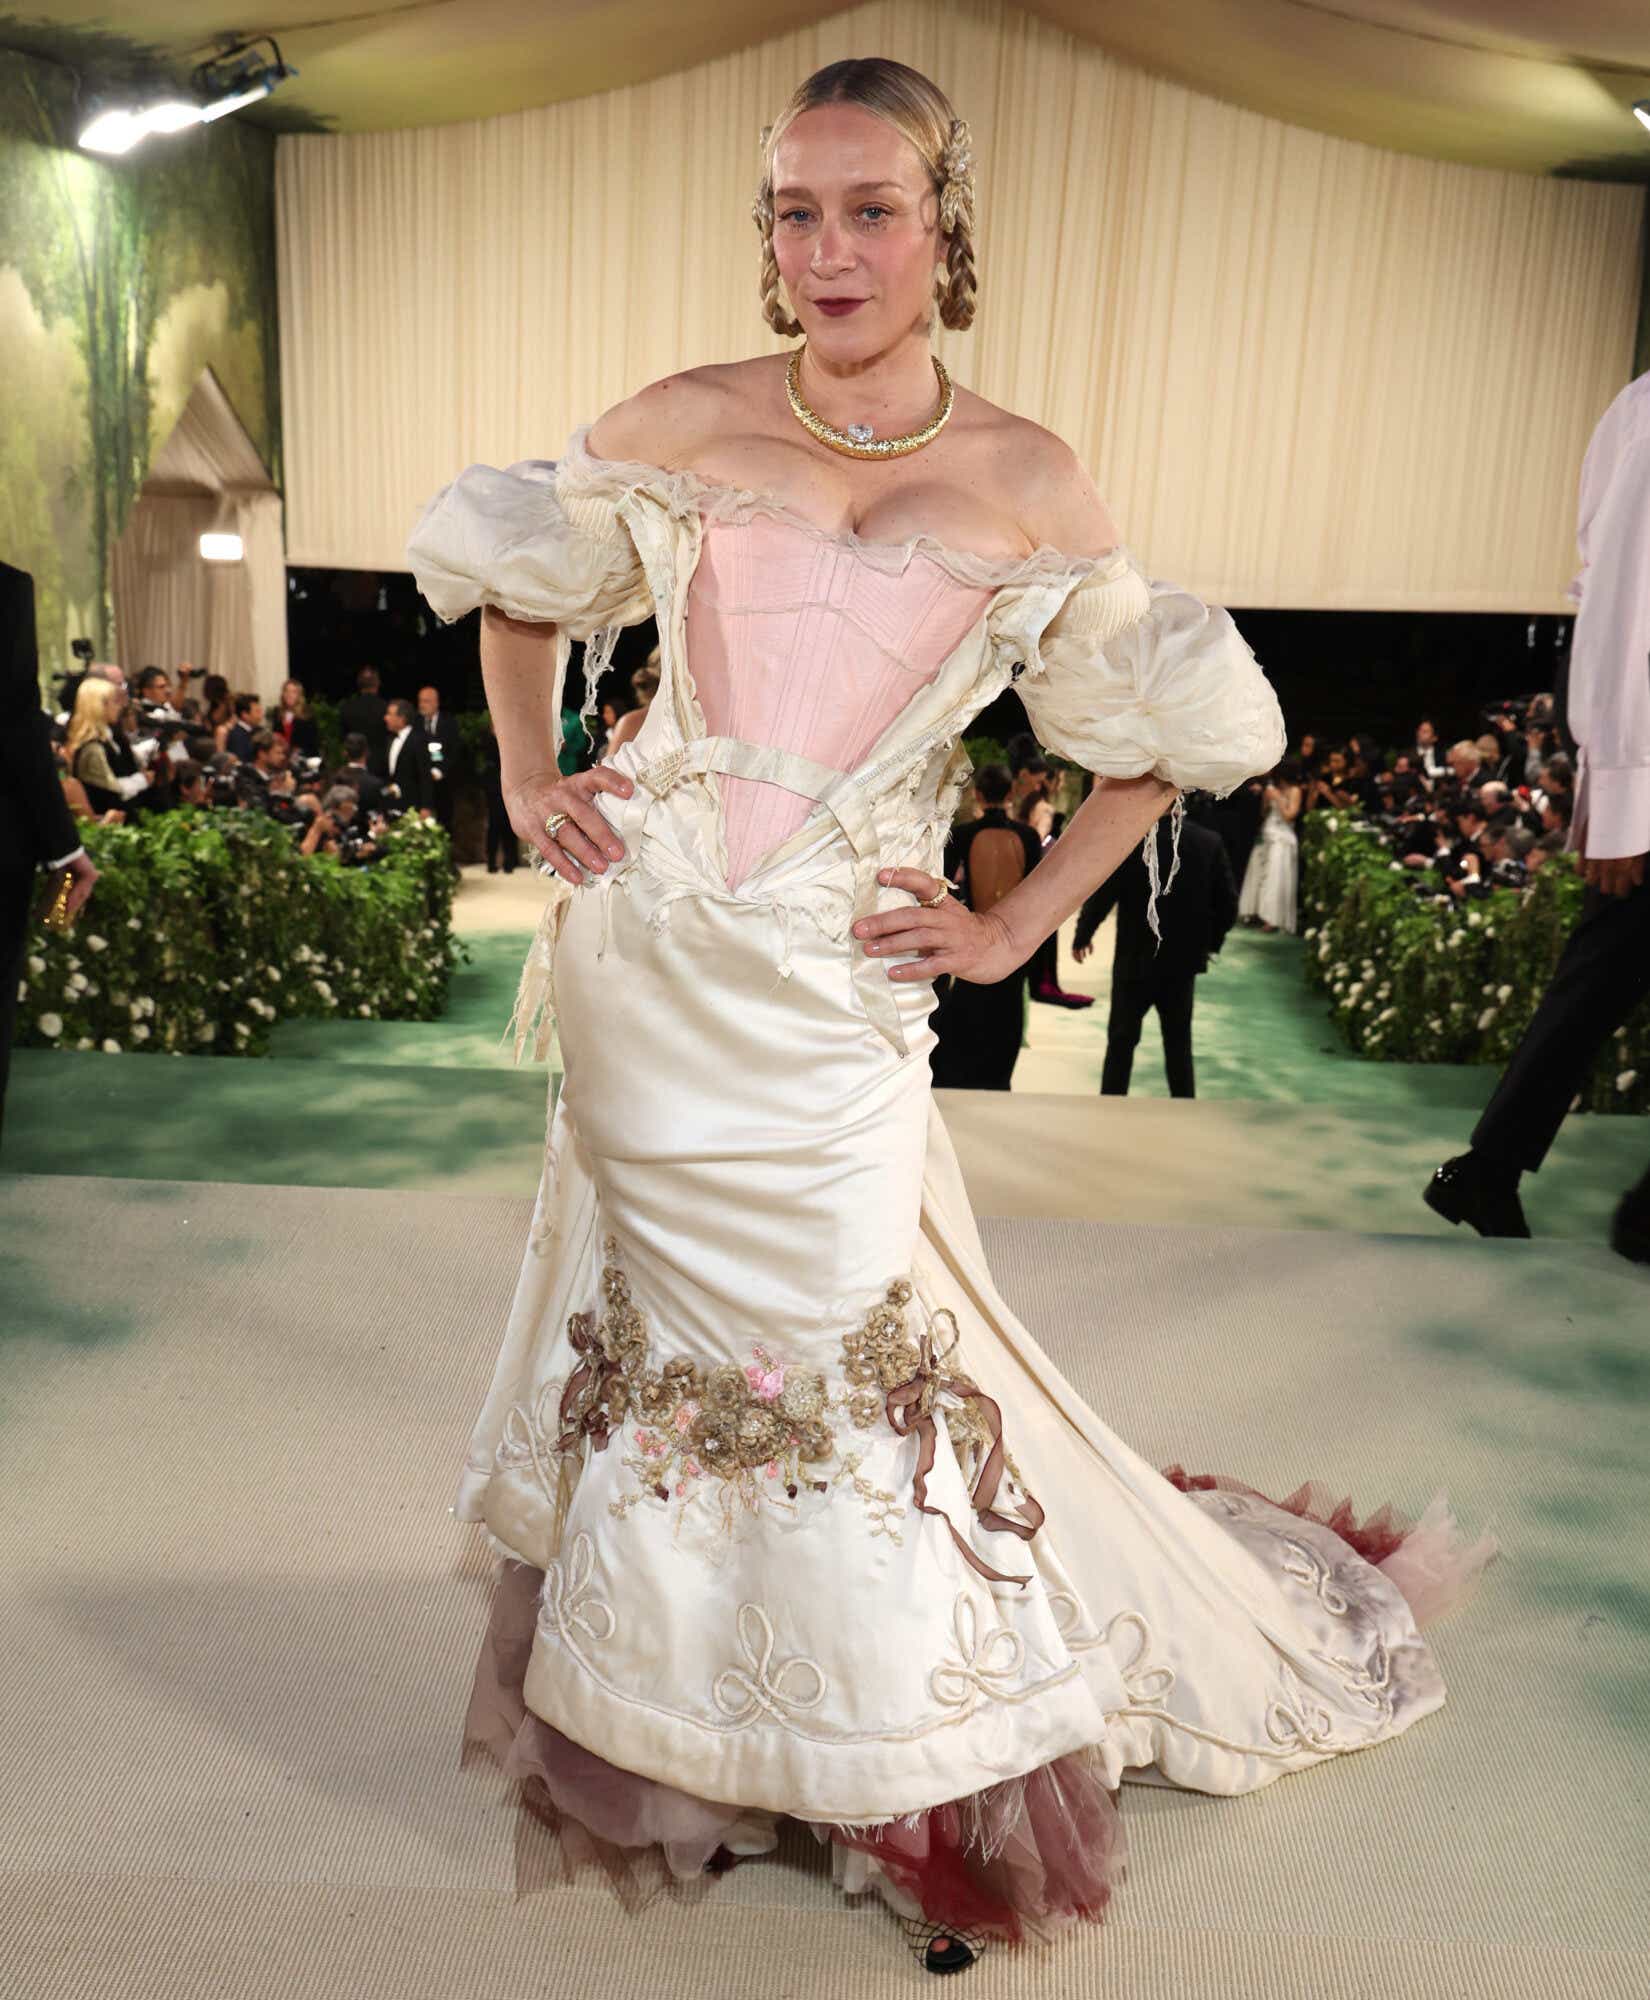 Chloë Sevigny wears a distressed Cinderalla-style cream dress torn at the front to reveal a pale pink bodice.